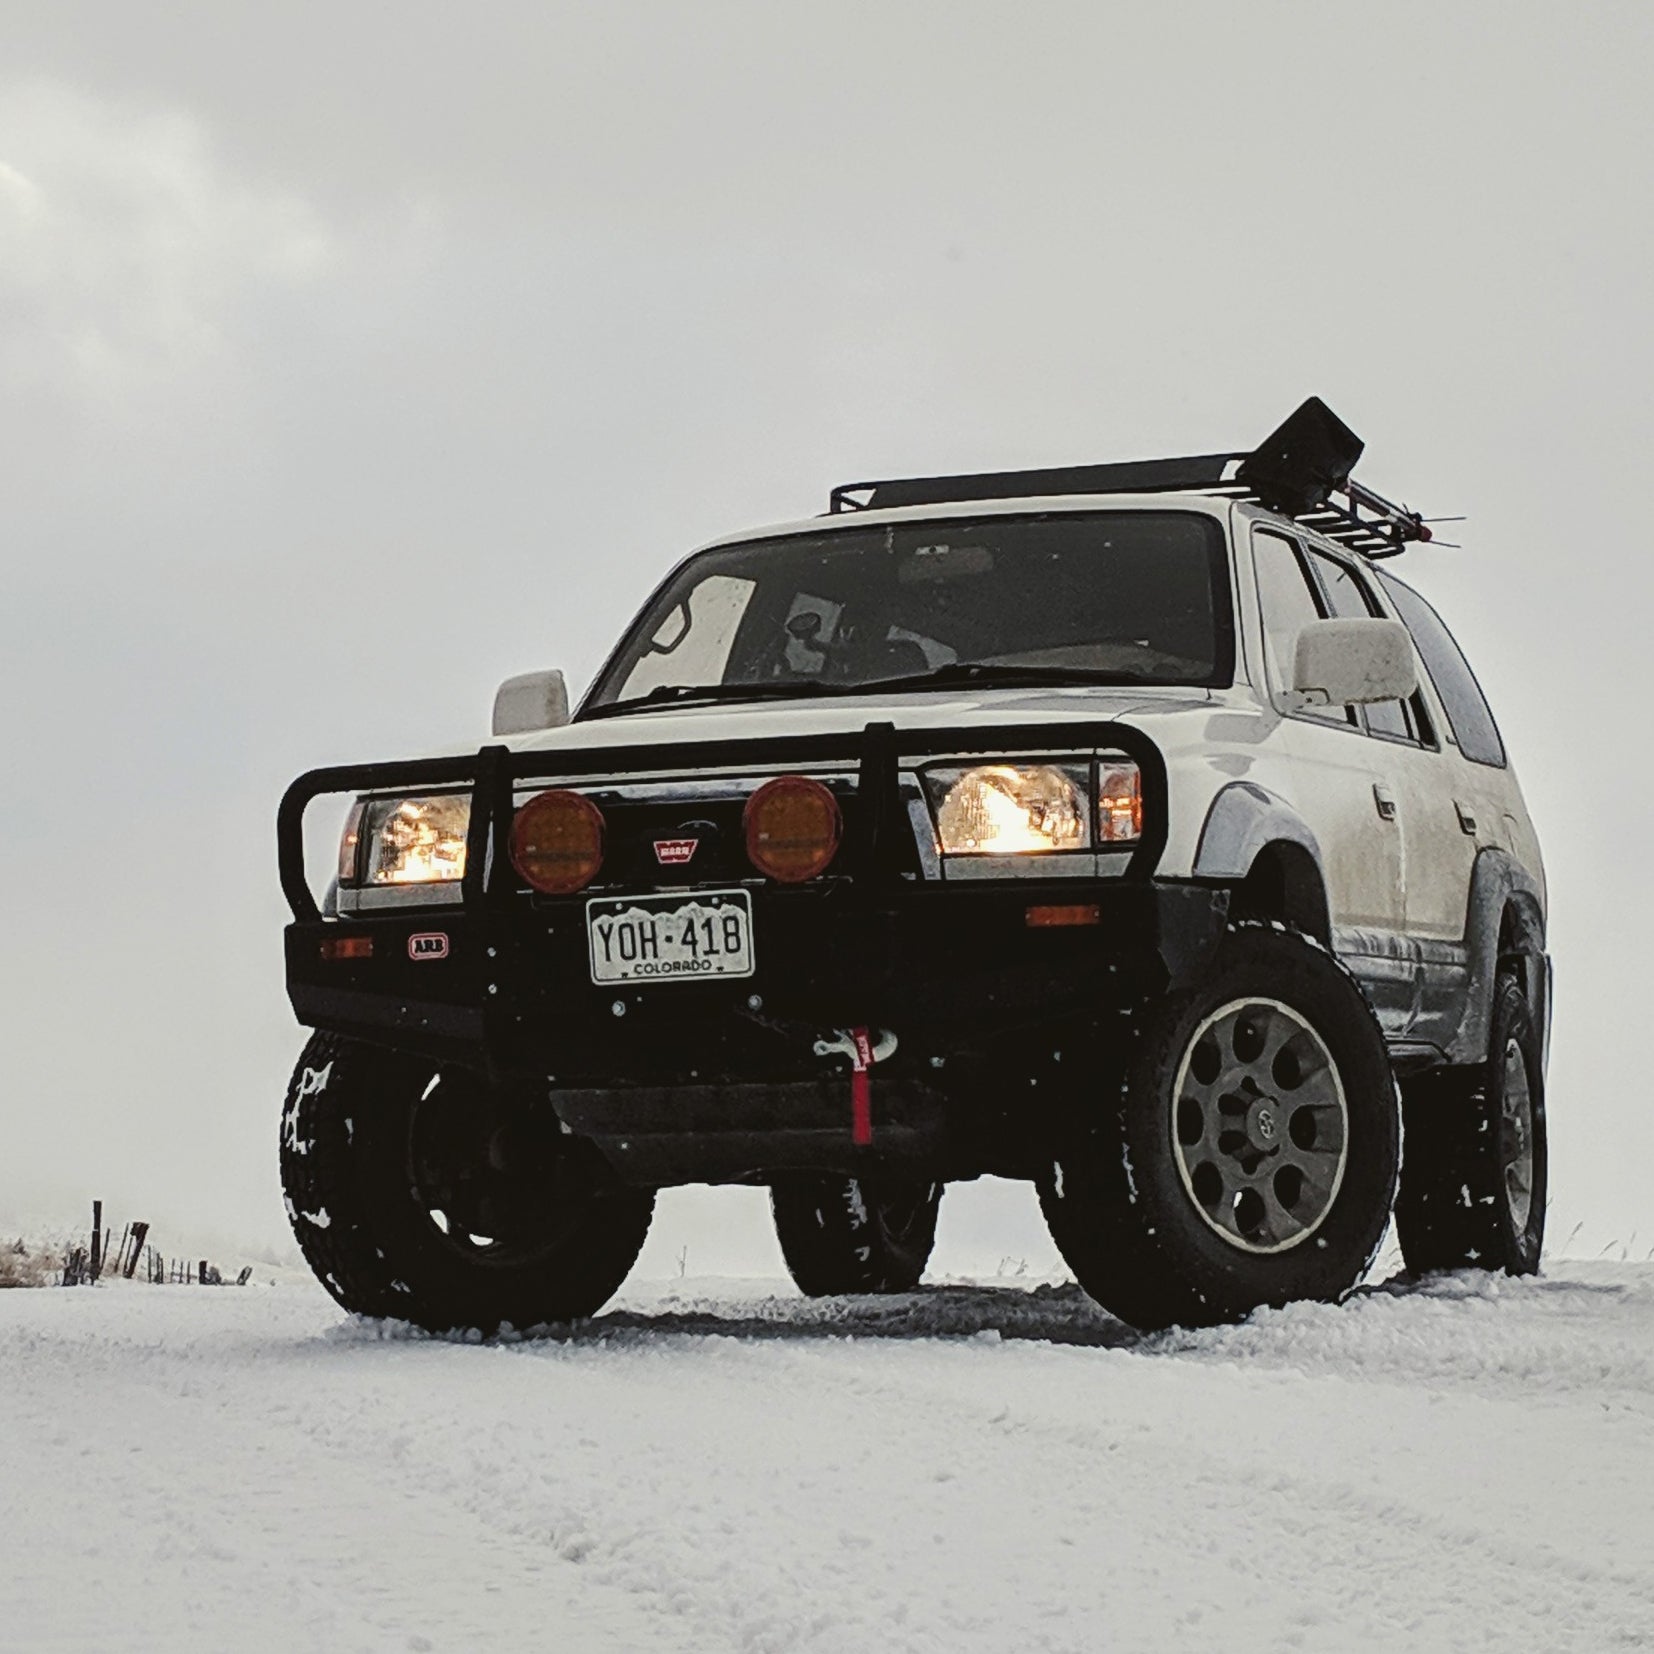 How to Build the Ultimate Winter Vehicle for $10,000